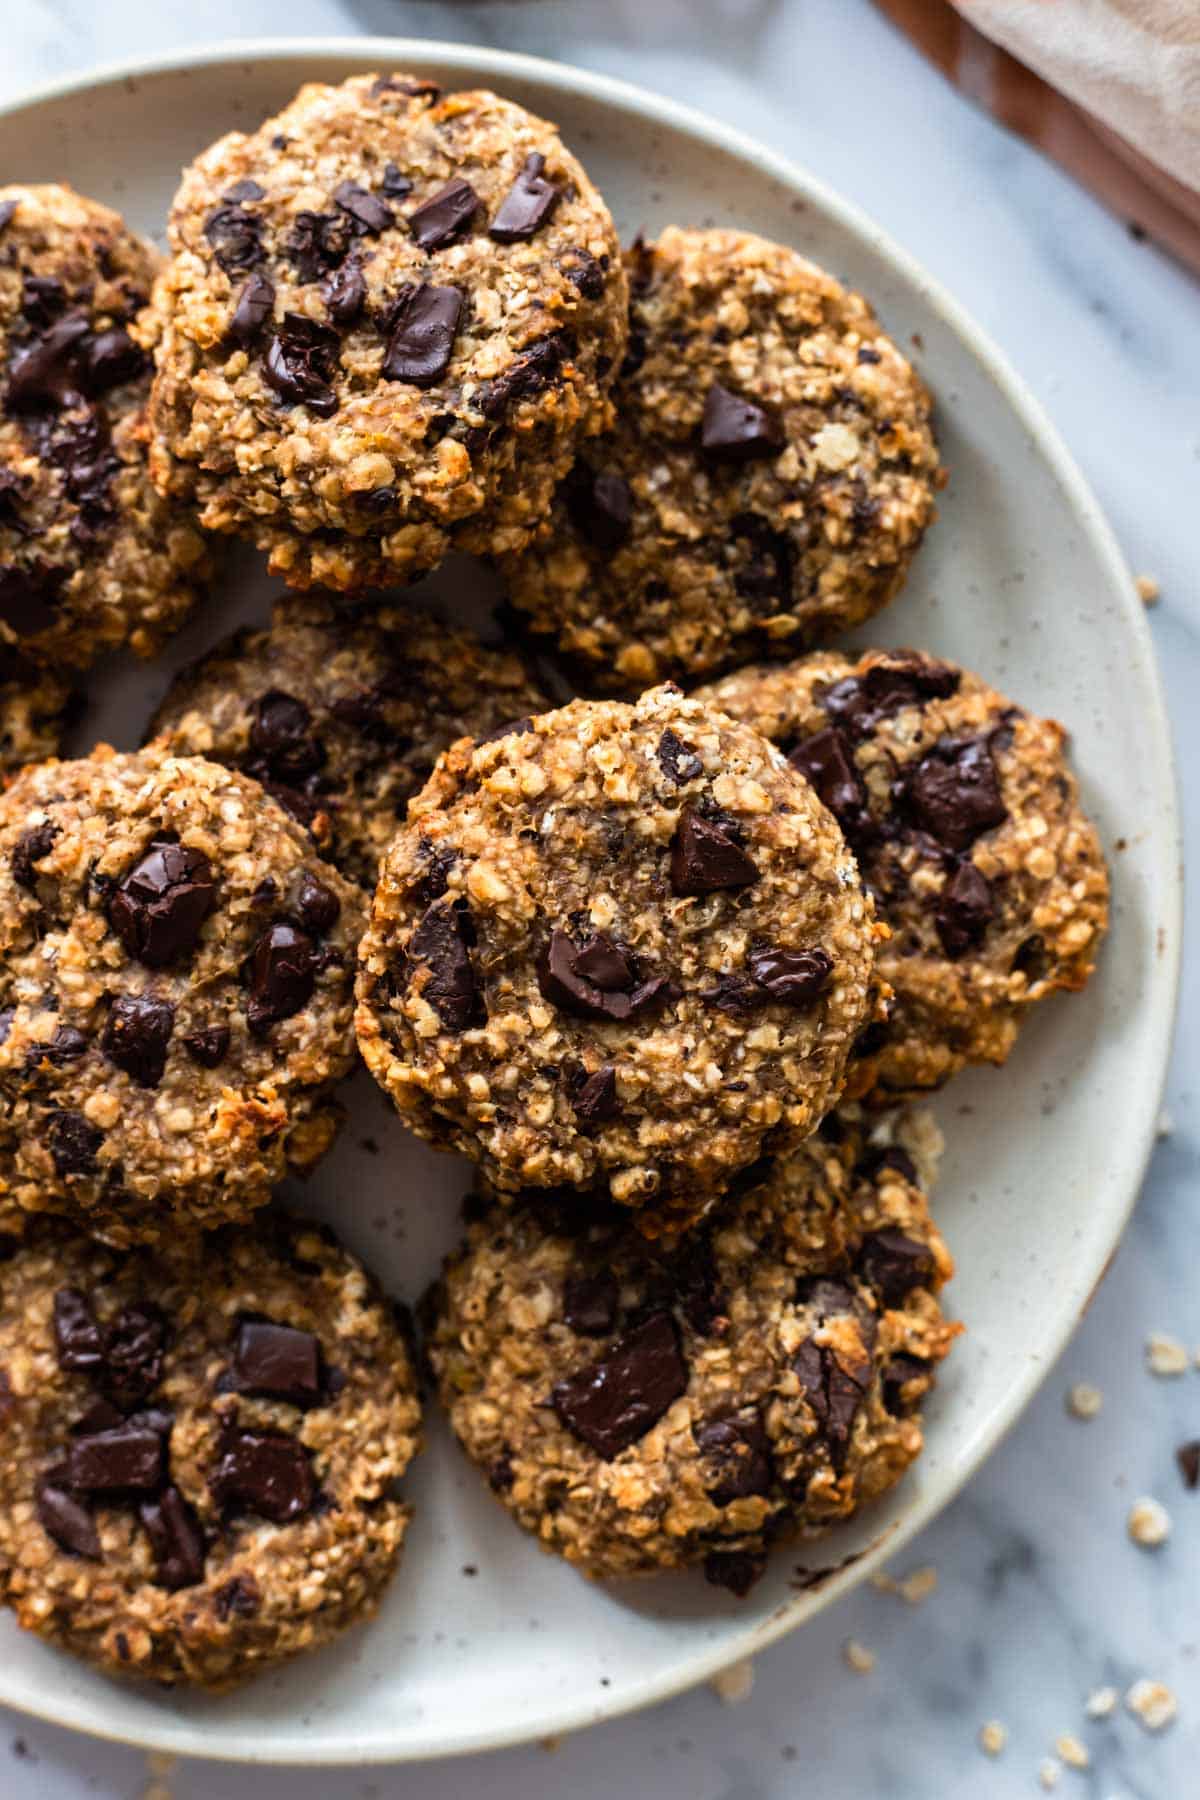 A plate with oatmeal cookies from up close